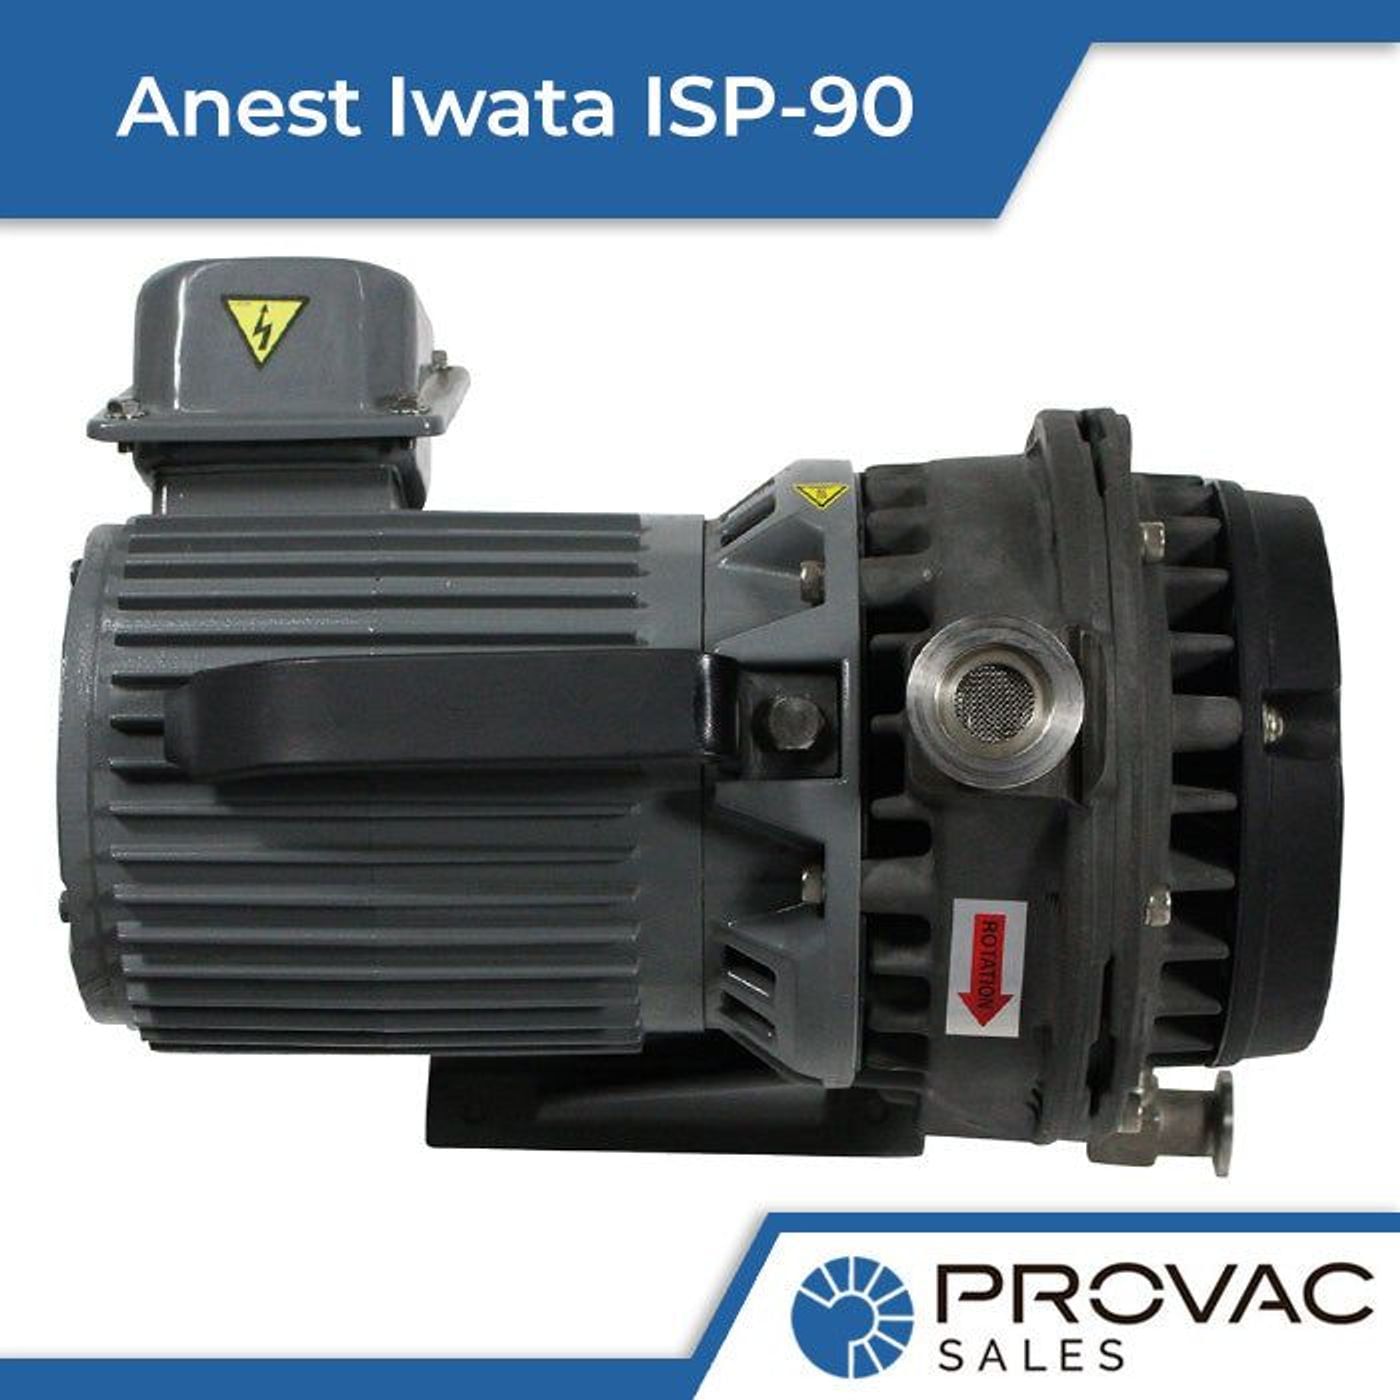 Anest Iwata ISP-90 Scroll Pump: Ready To Ship, In Stock